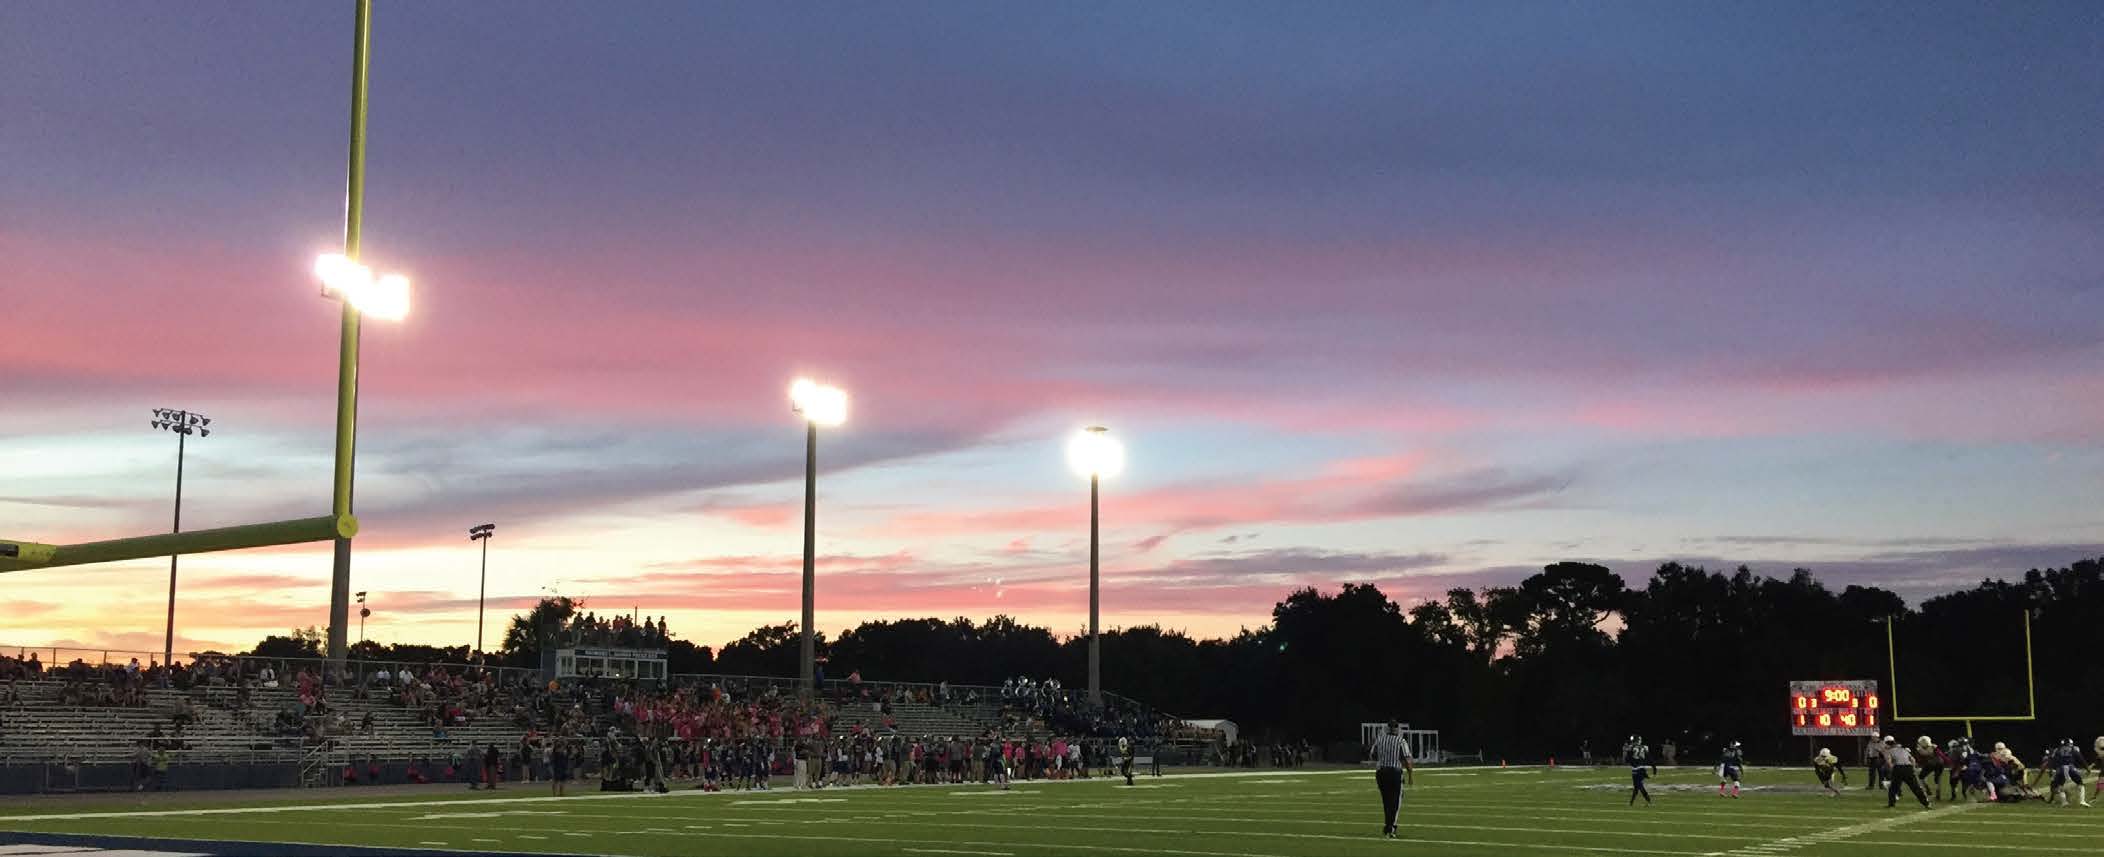 Lake Howell High School Athletic Complex at dusk